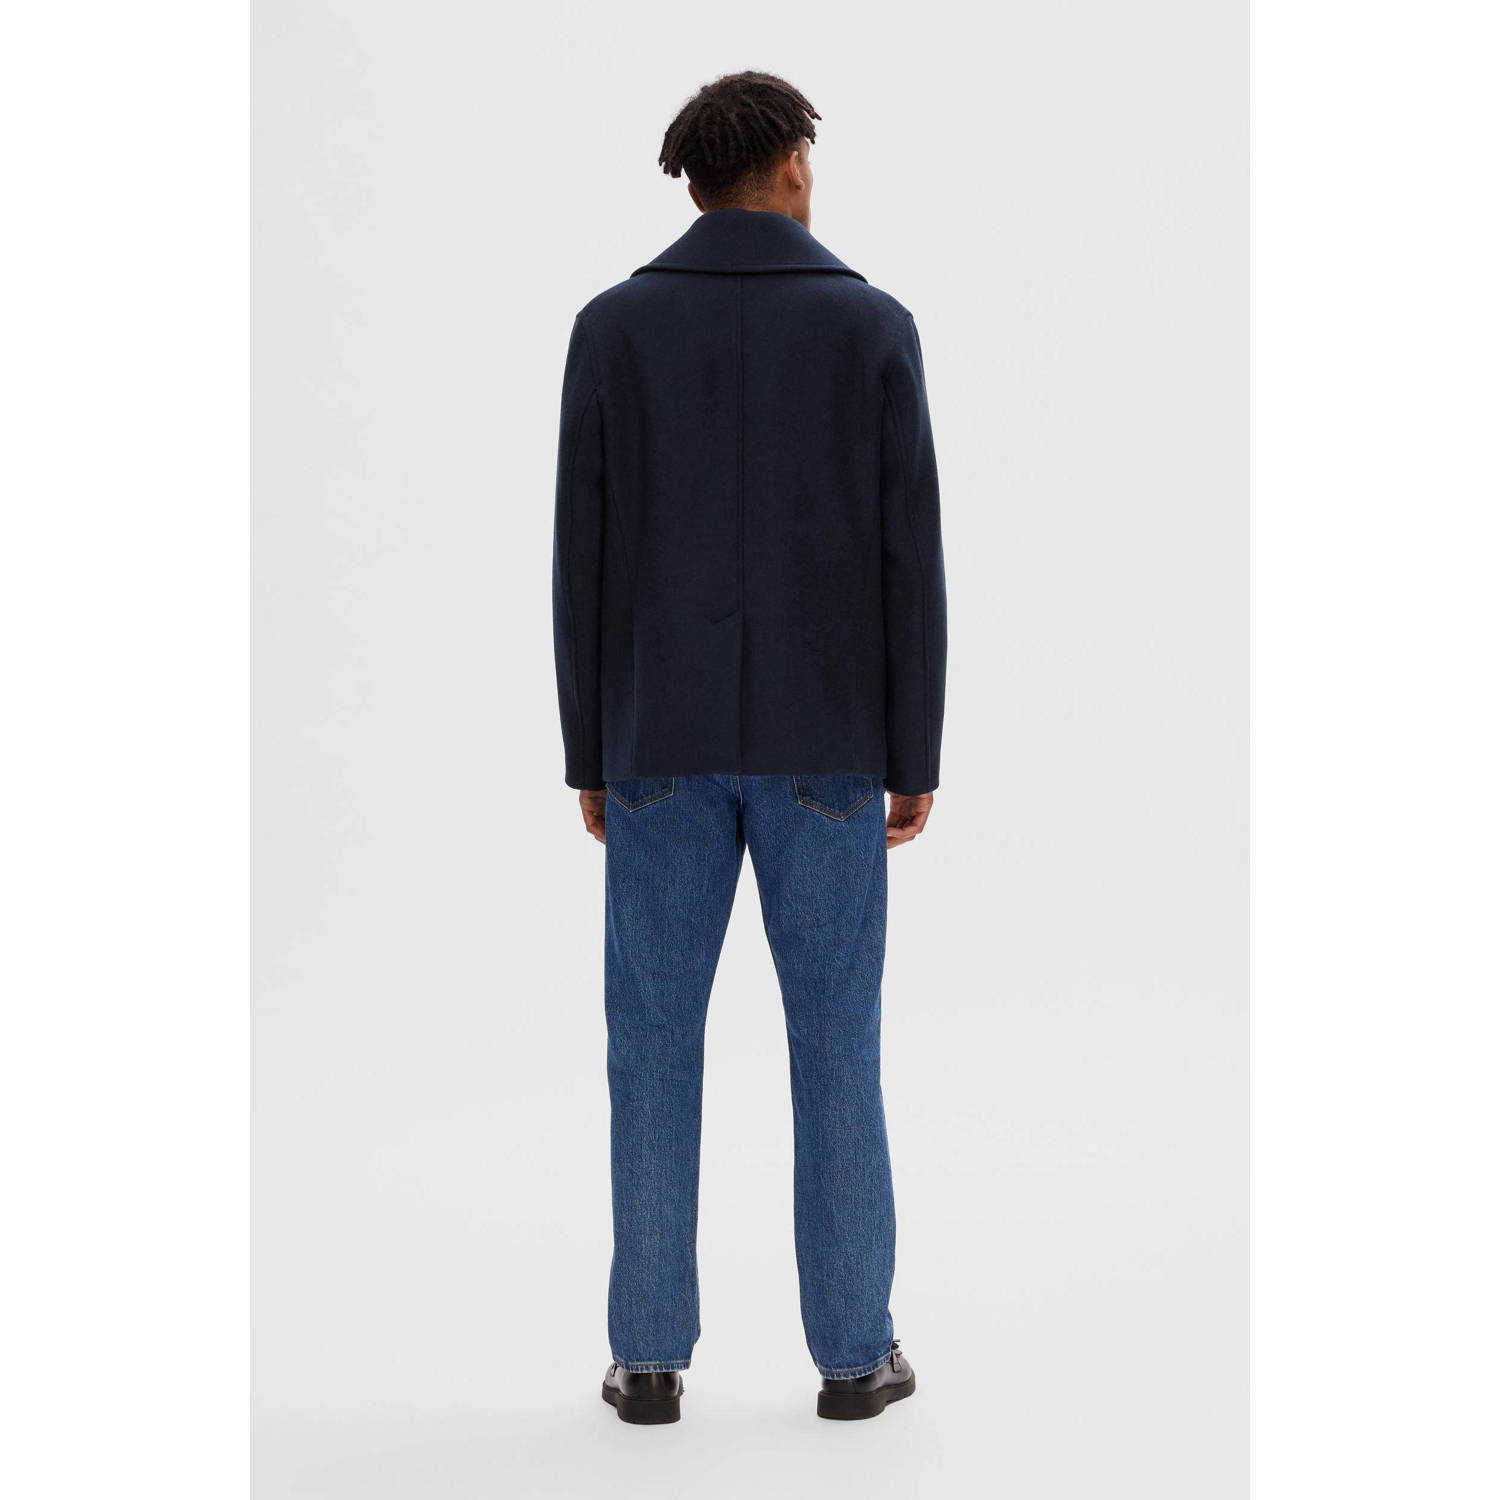 SELECTED HOMME jas SLHARCHIVE met wol sky captain